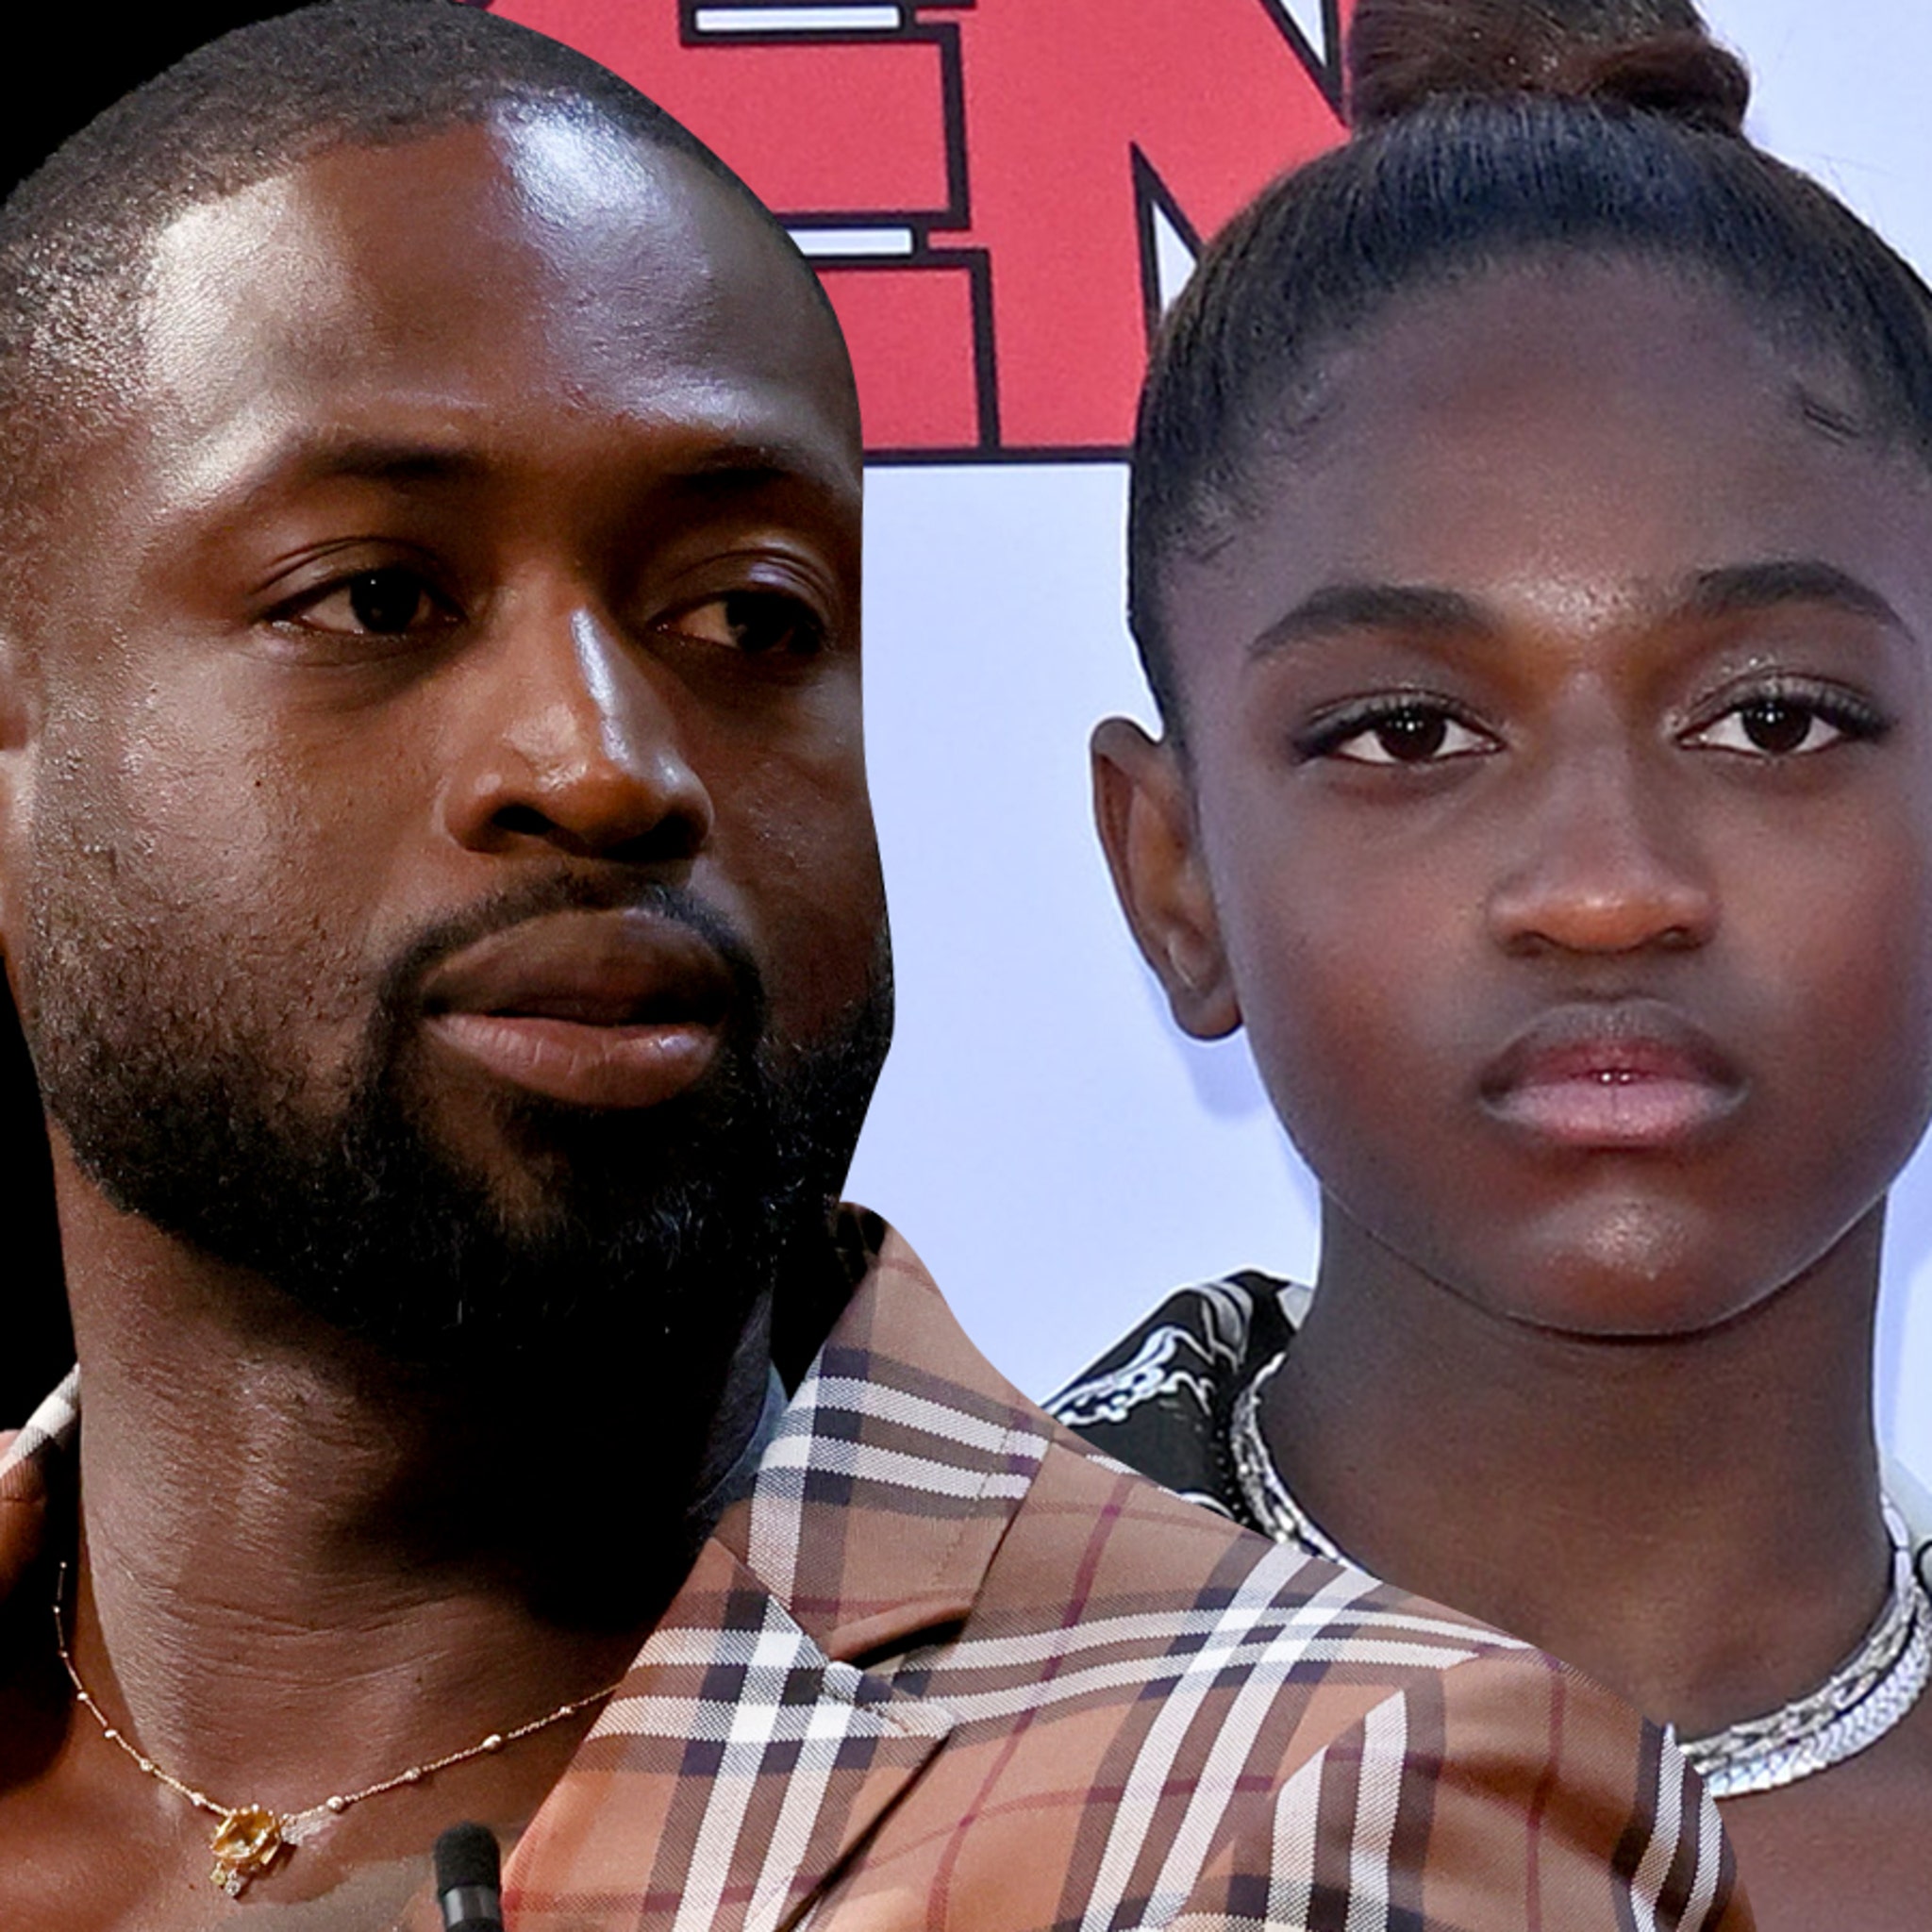 Ruthless New York Knicks fans go after Dwyane Wade's trans child